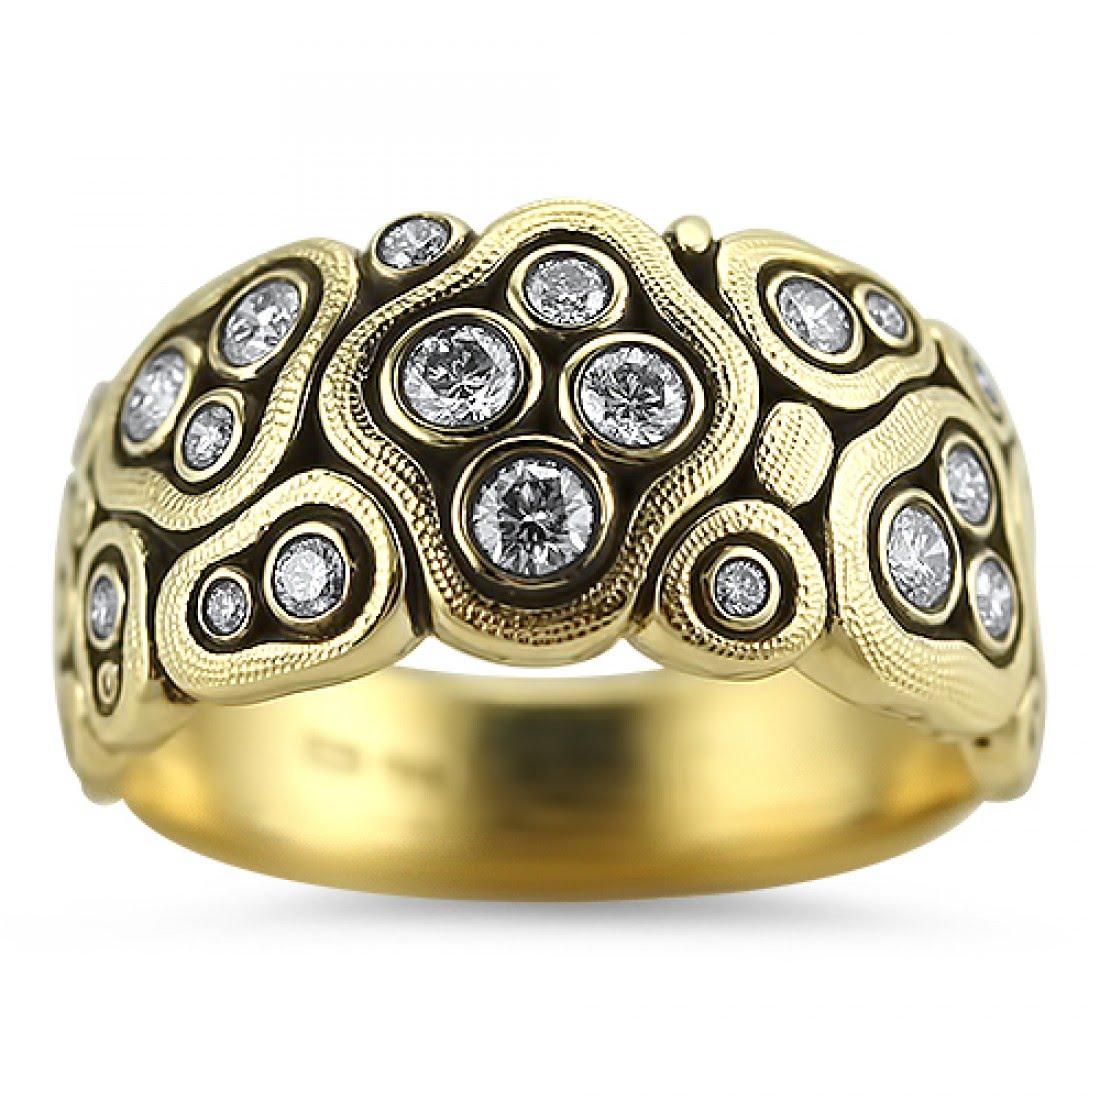 alex sepkus swirling water dome band 18k yellow gold white diamonds r-86 tapered design